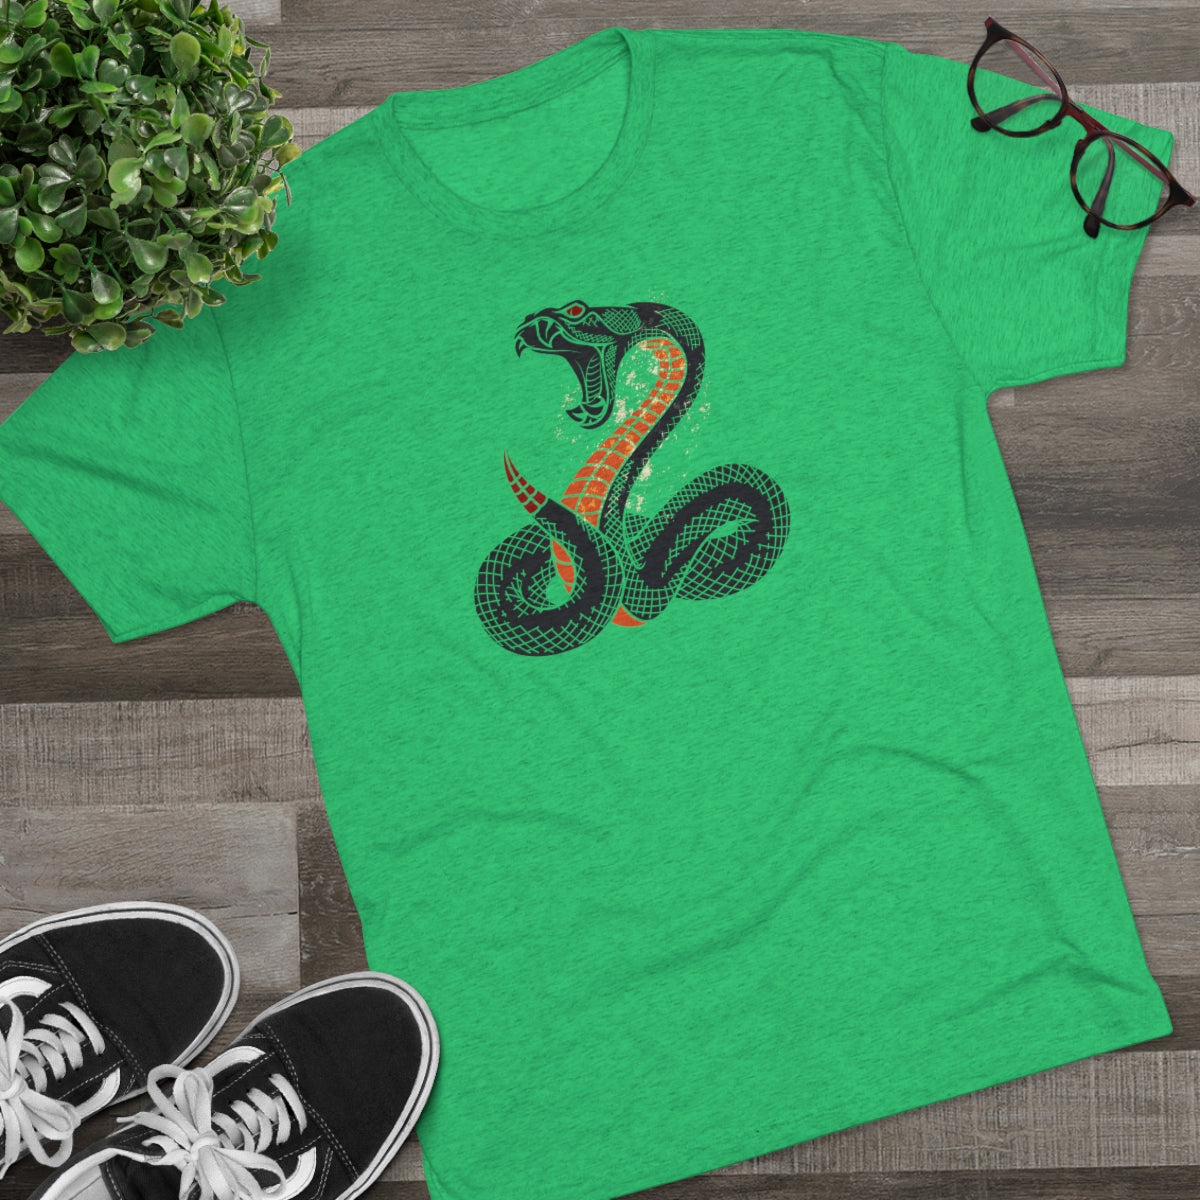 Special Collection – Phobia: Ophidiophobia – Unisex Tri-Blend Crew Tee